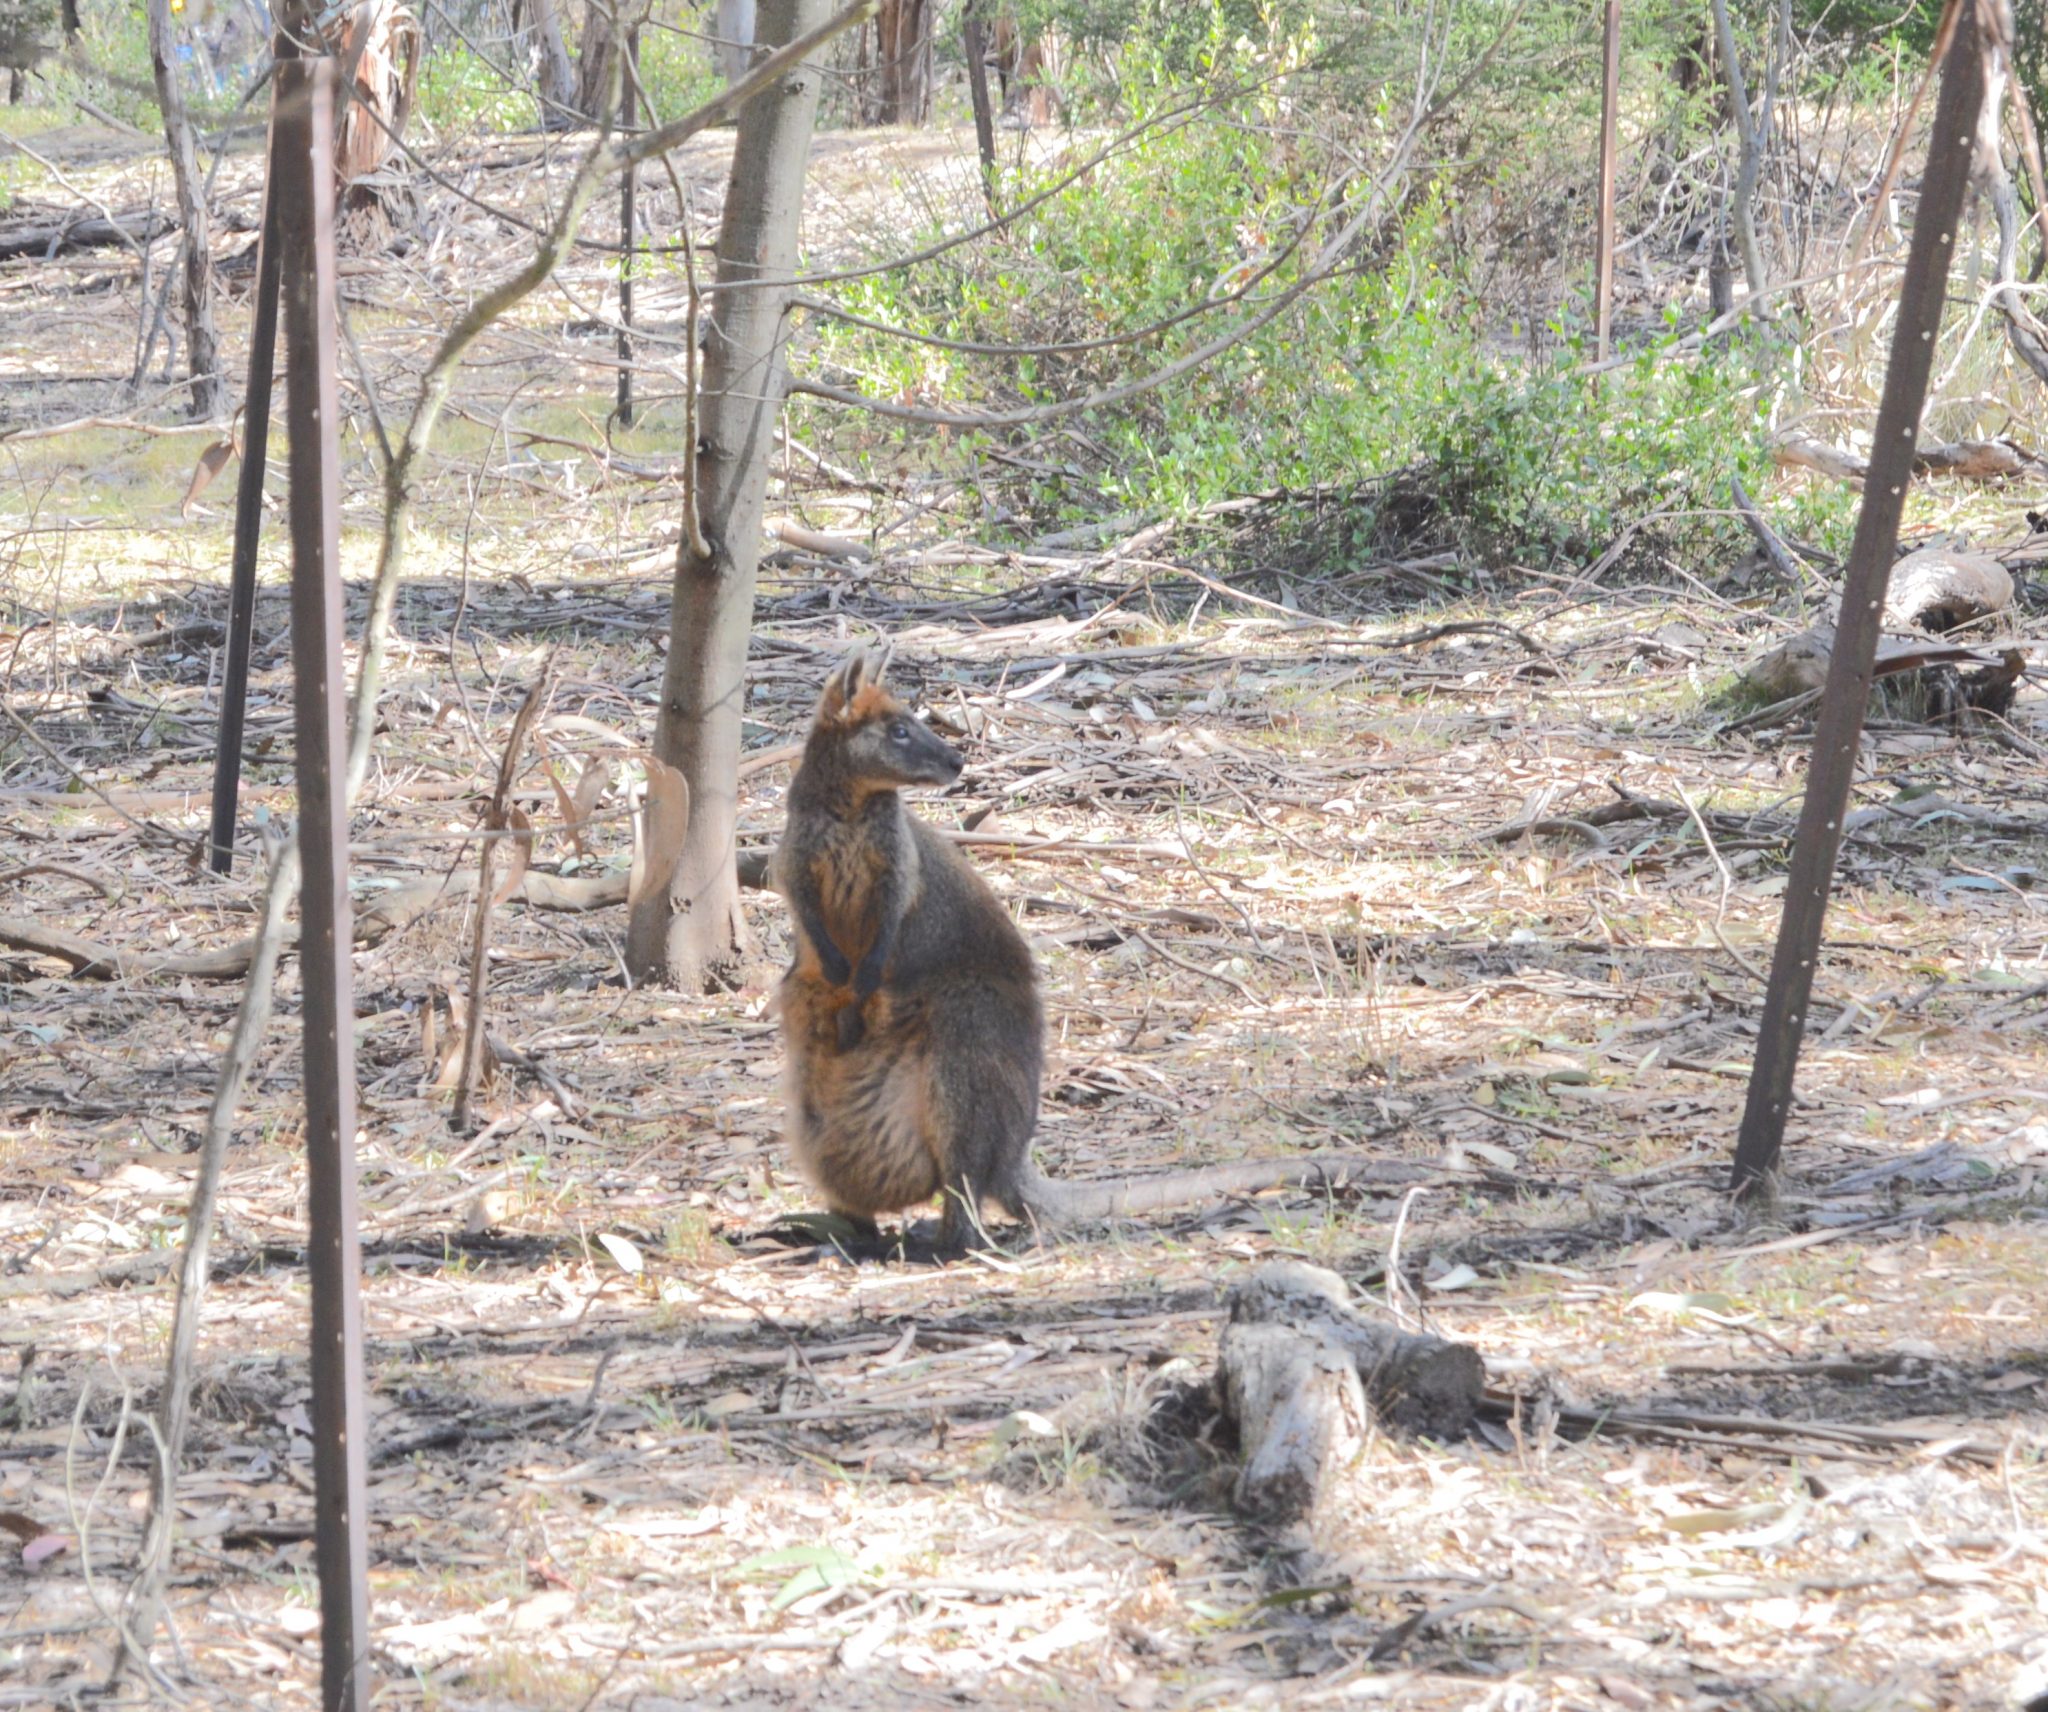 134.8. A wallaby with a joey enjoyed living at the koala naural preserve on Phillip Island on